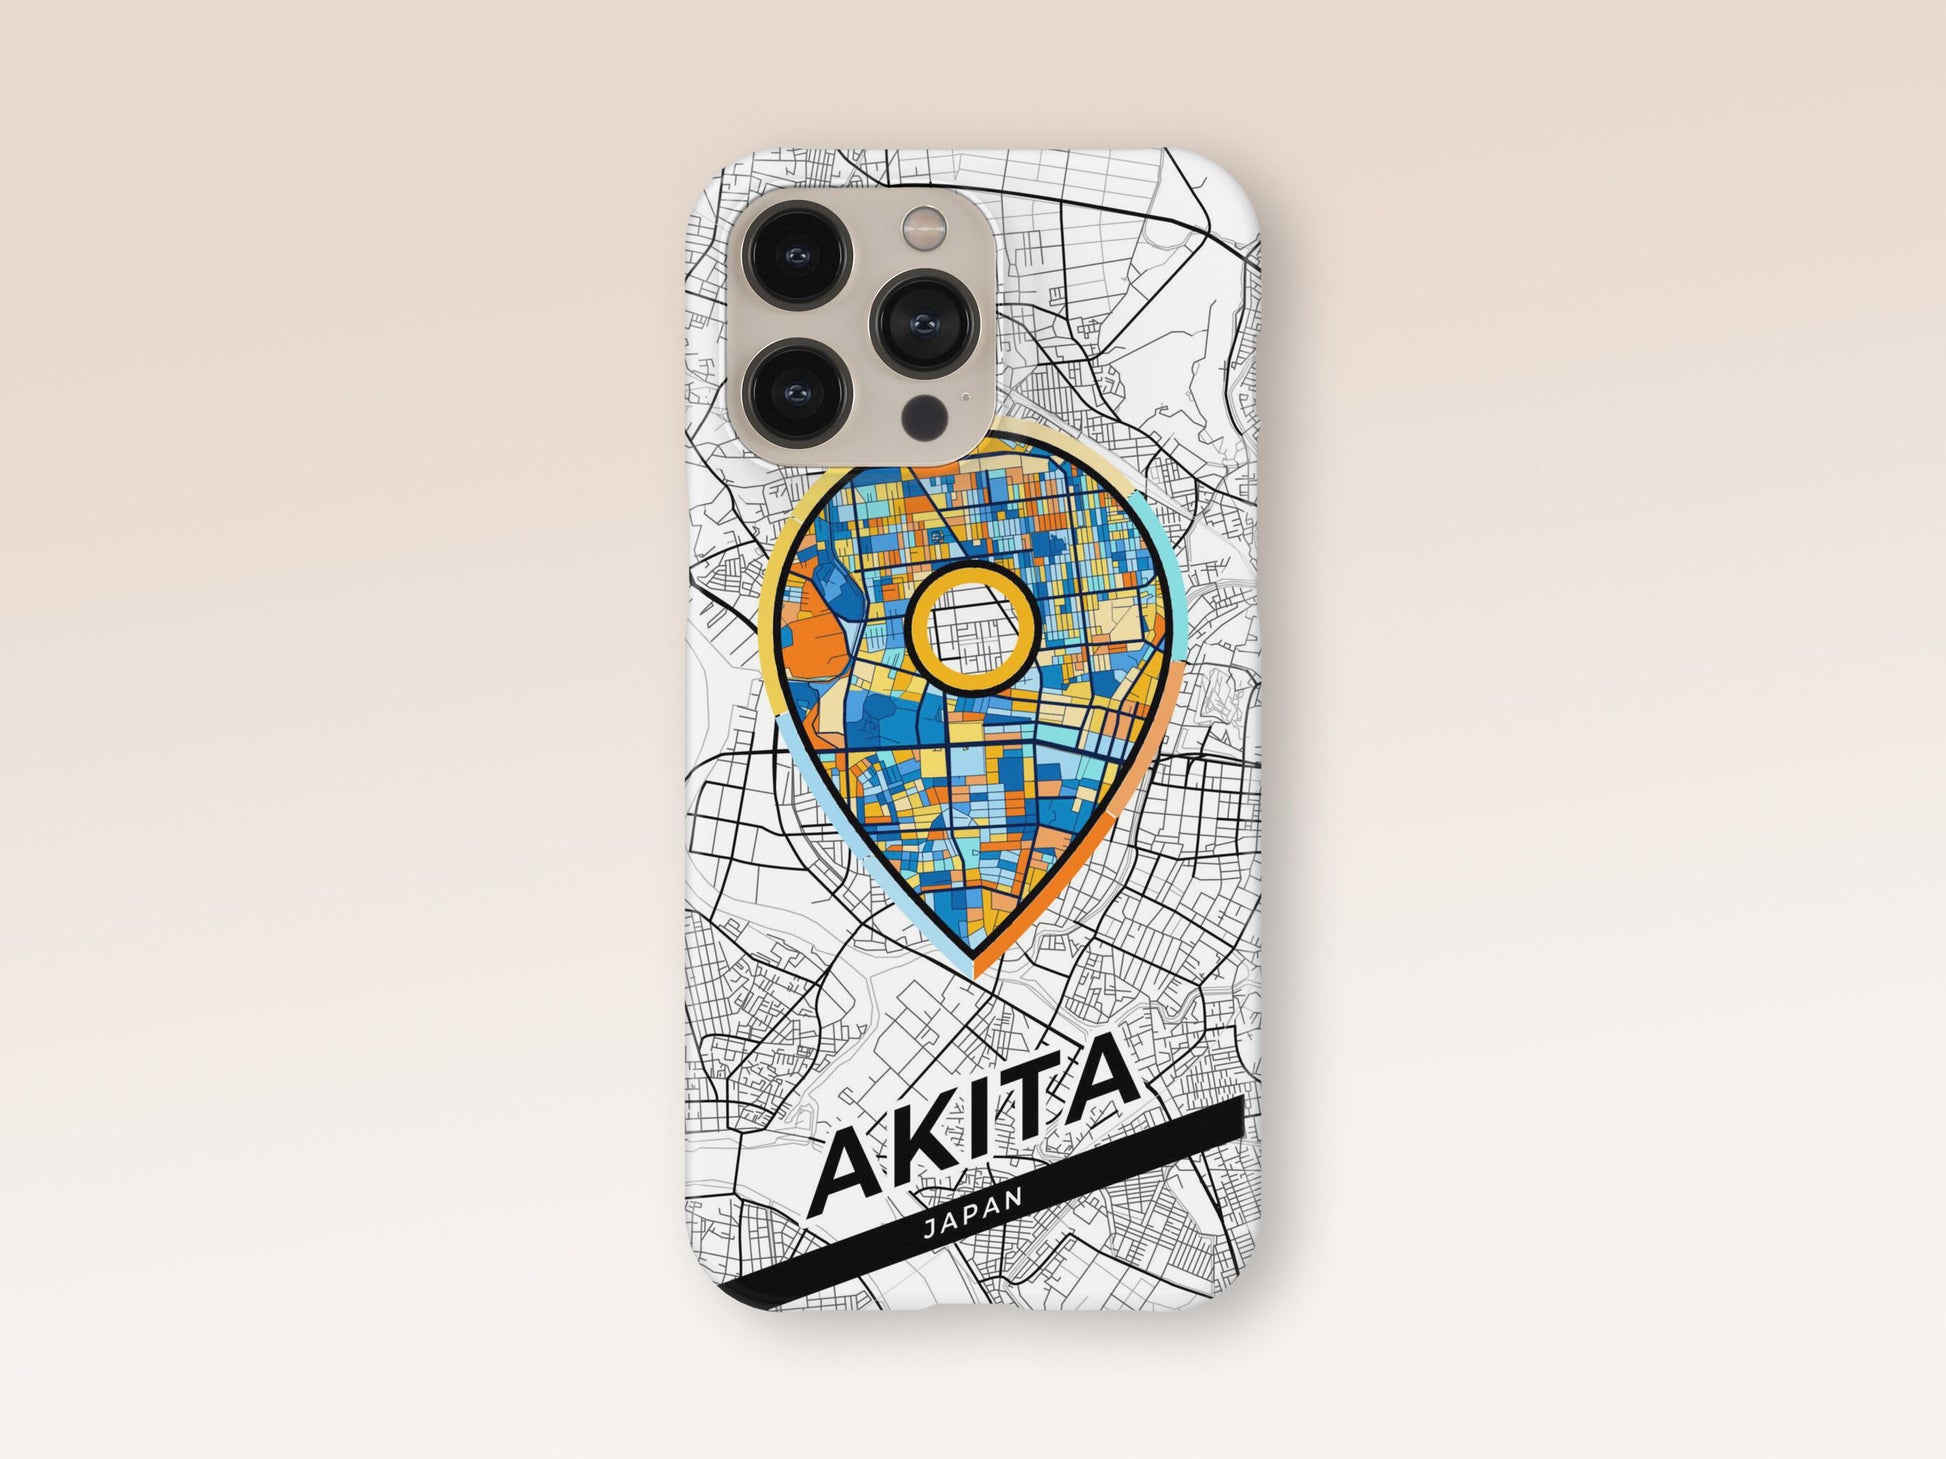 Akita Japan slim phone case with colorful icon. Birthday, wedding or housewarming gift. Couple match cases. 1